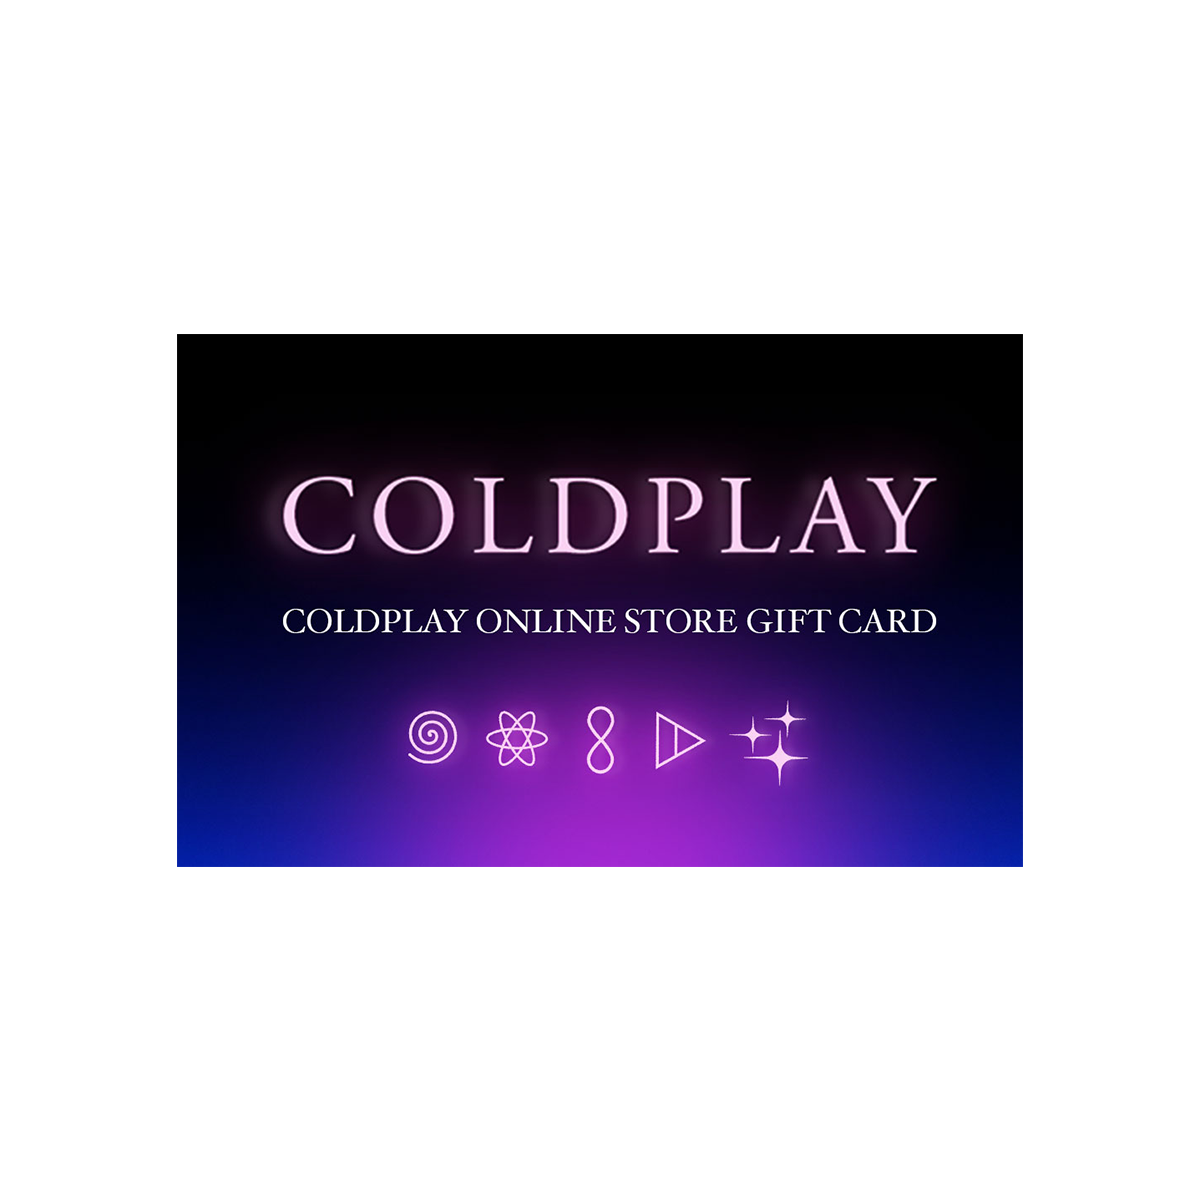 Coldplay US Gift Card-Coldplay